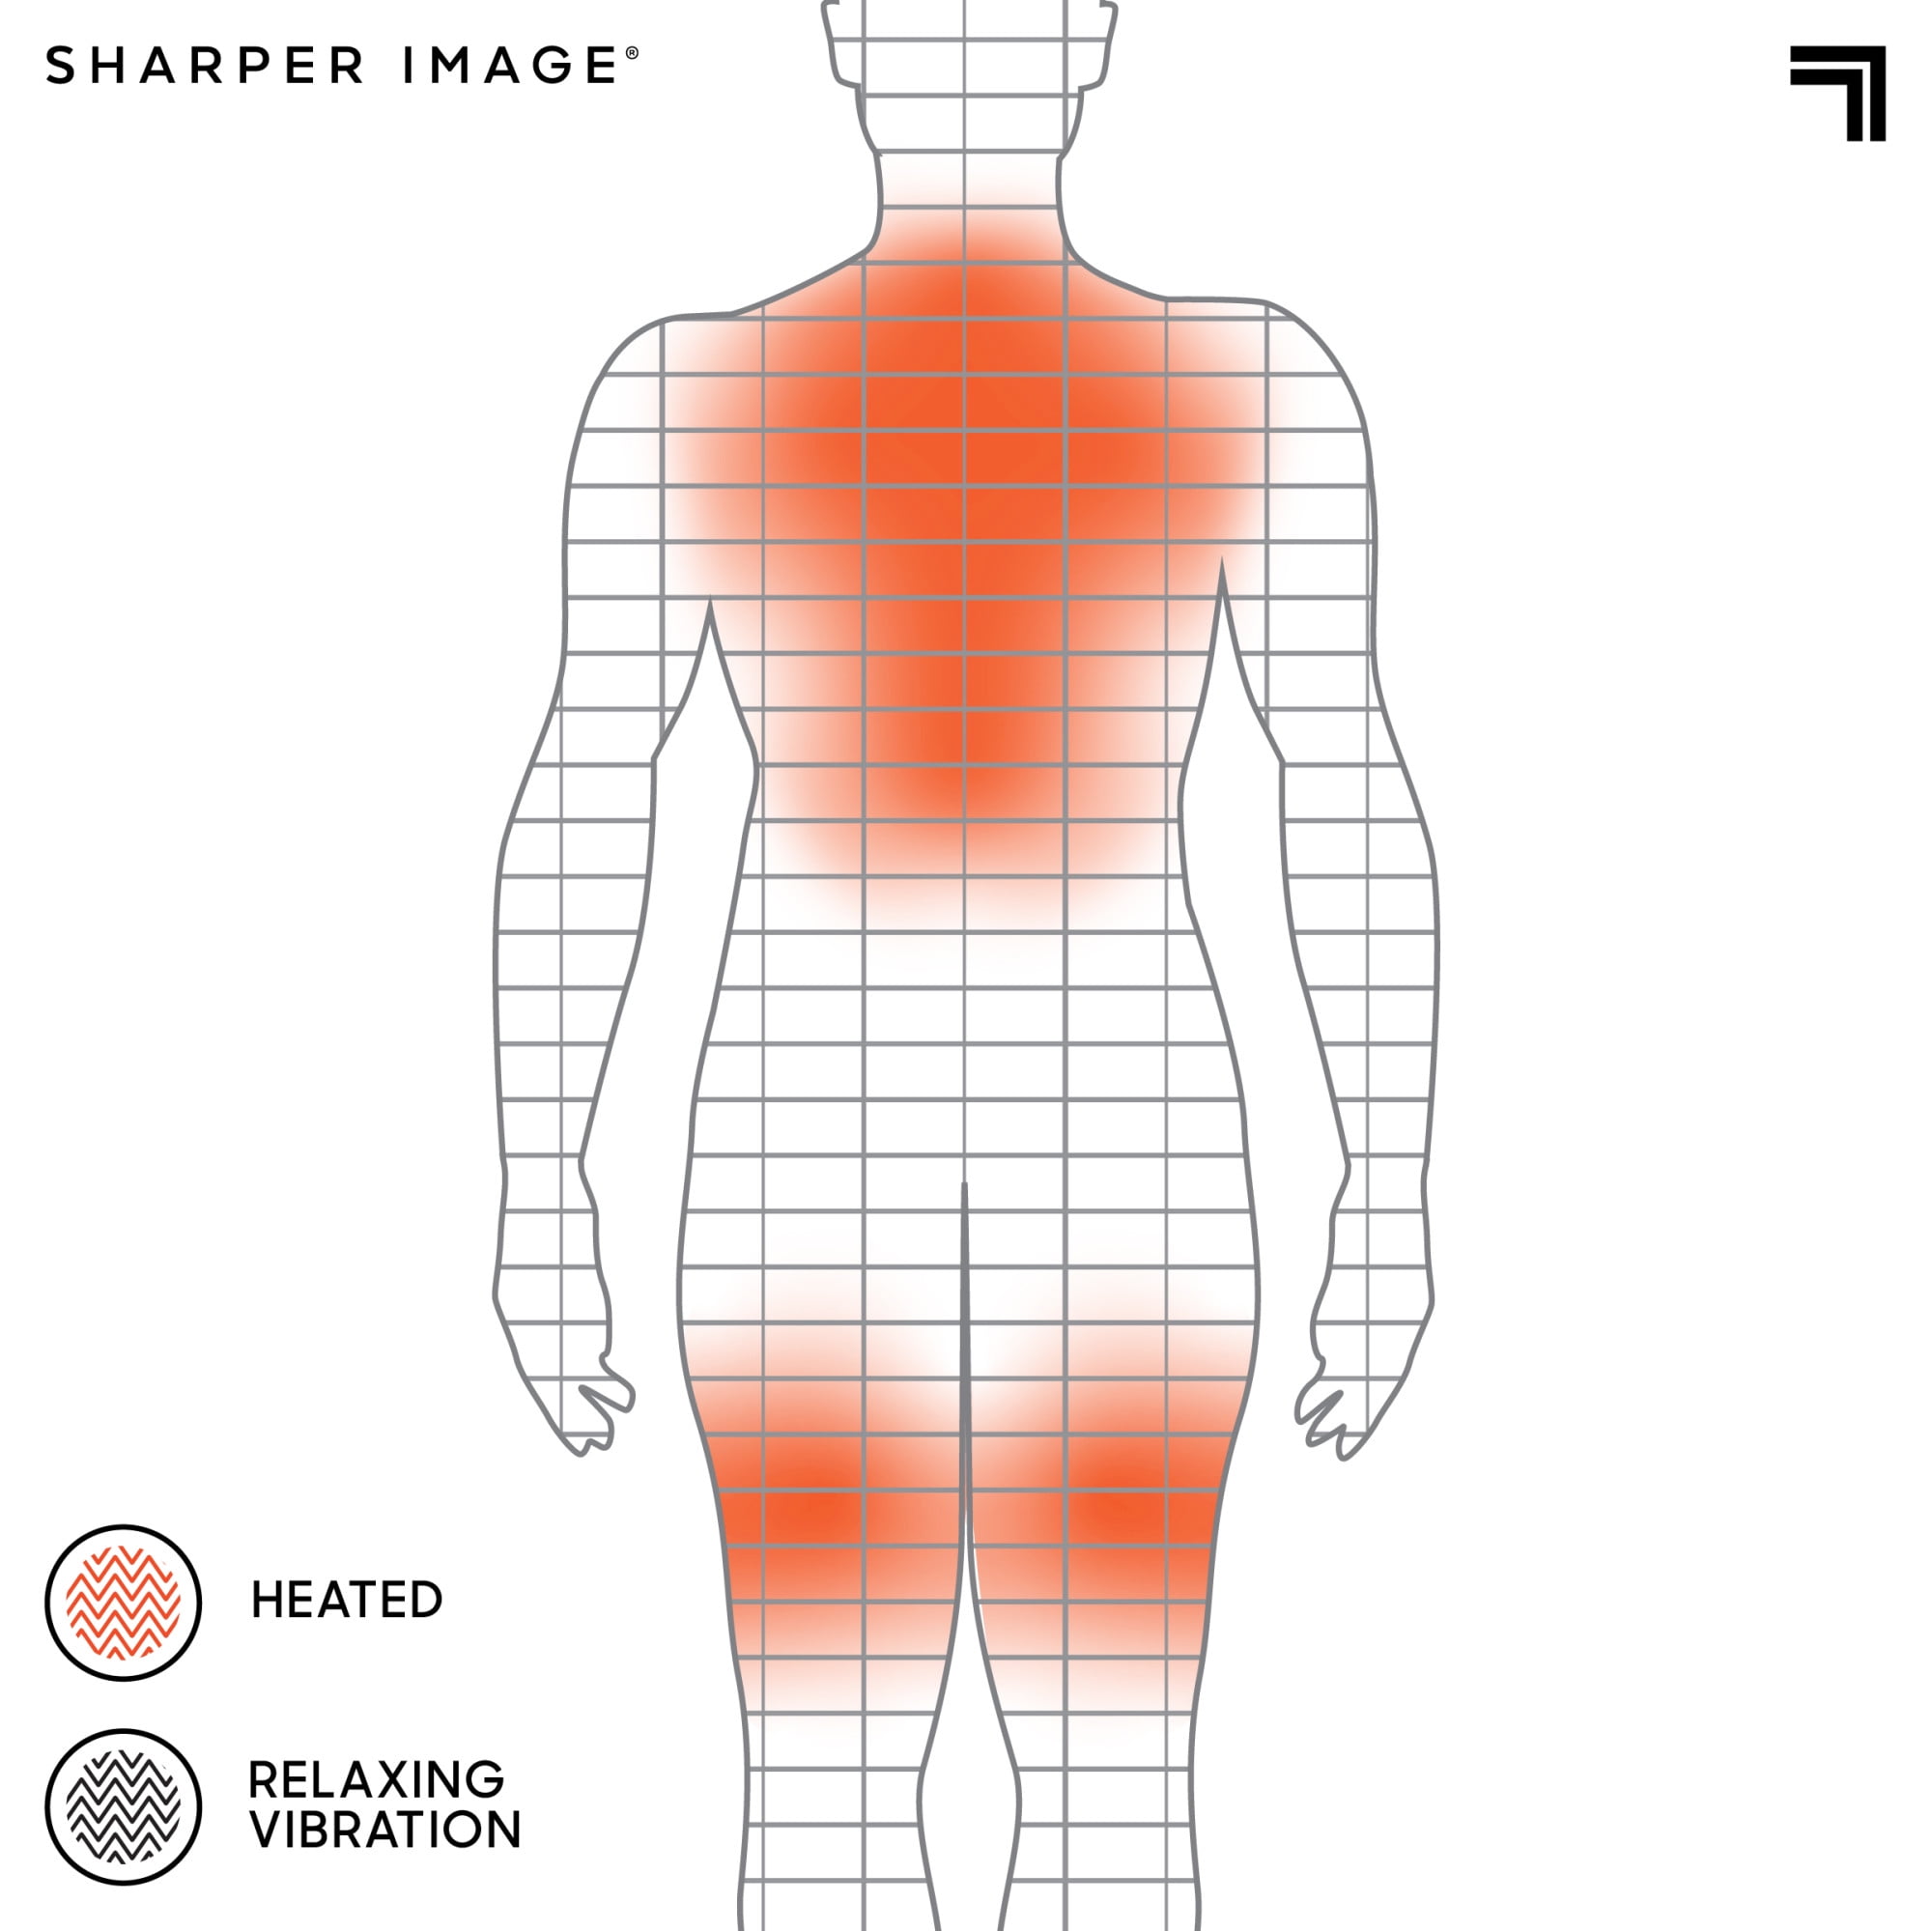 Sharper Image Neck and Back Heat Electric Massage Body Wrap